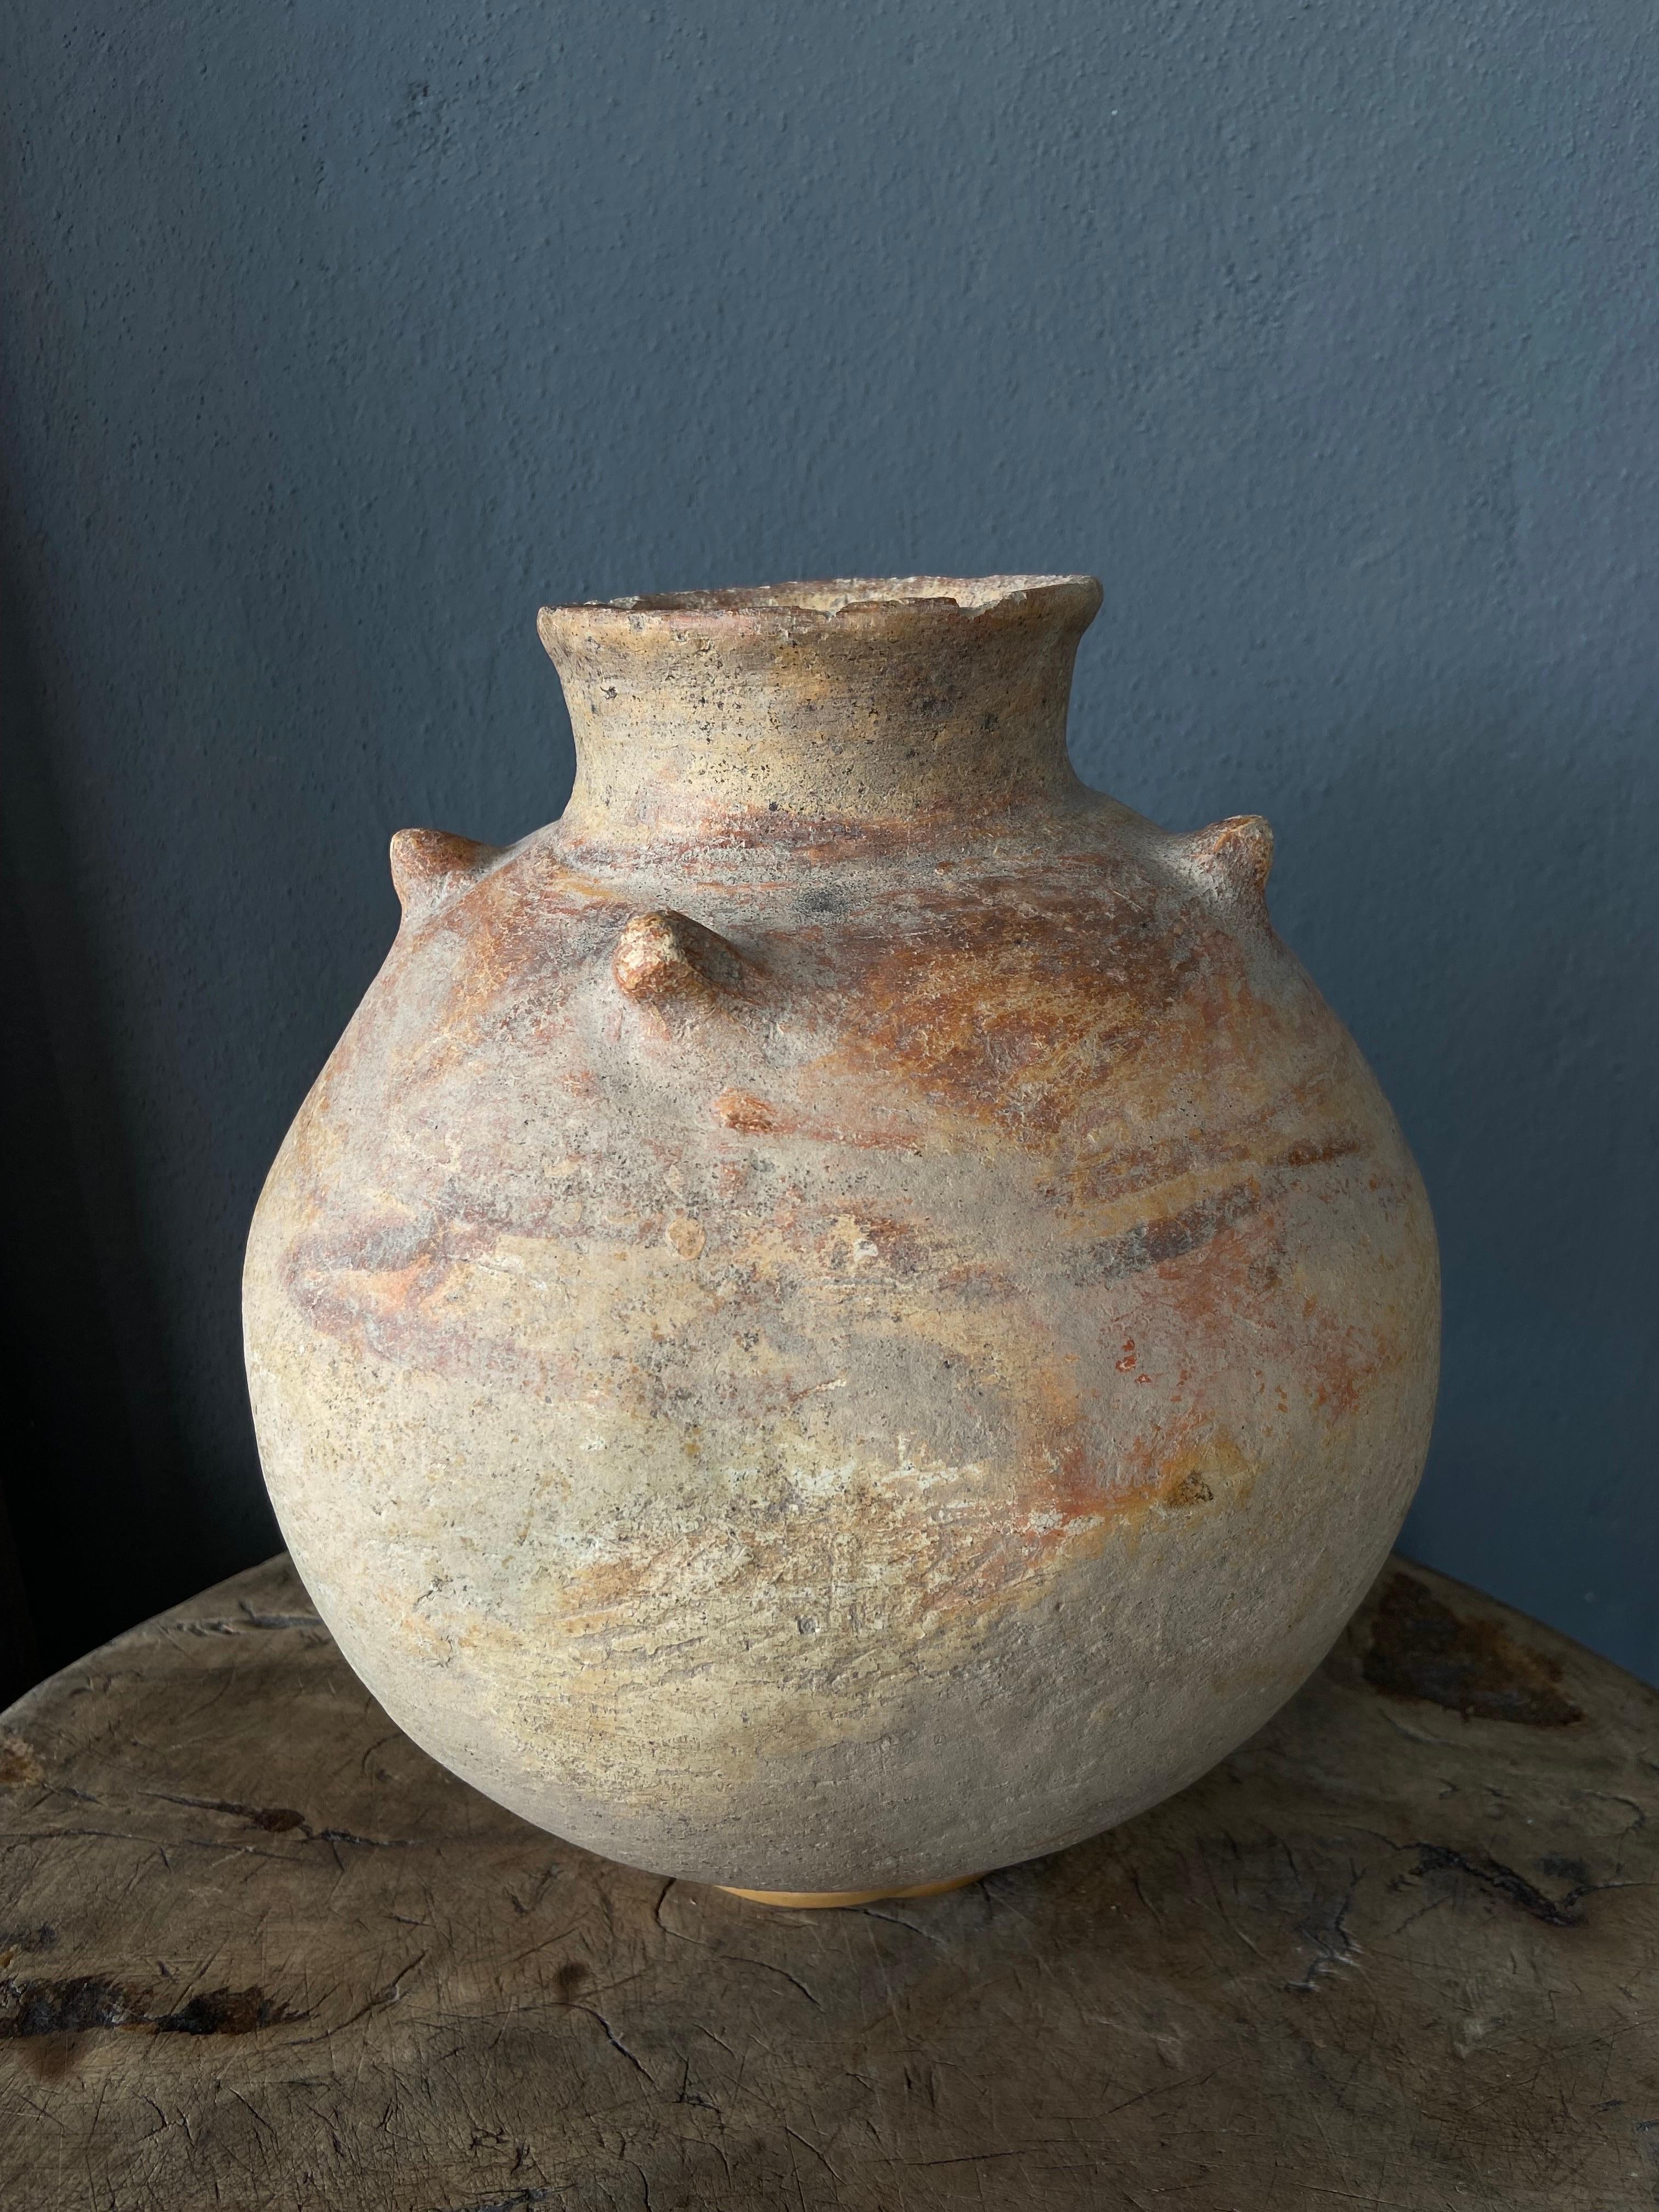 Primitive Archeological Hand Painted Ceramic Vessel From Mexico, Circa 12th Century For Sale